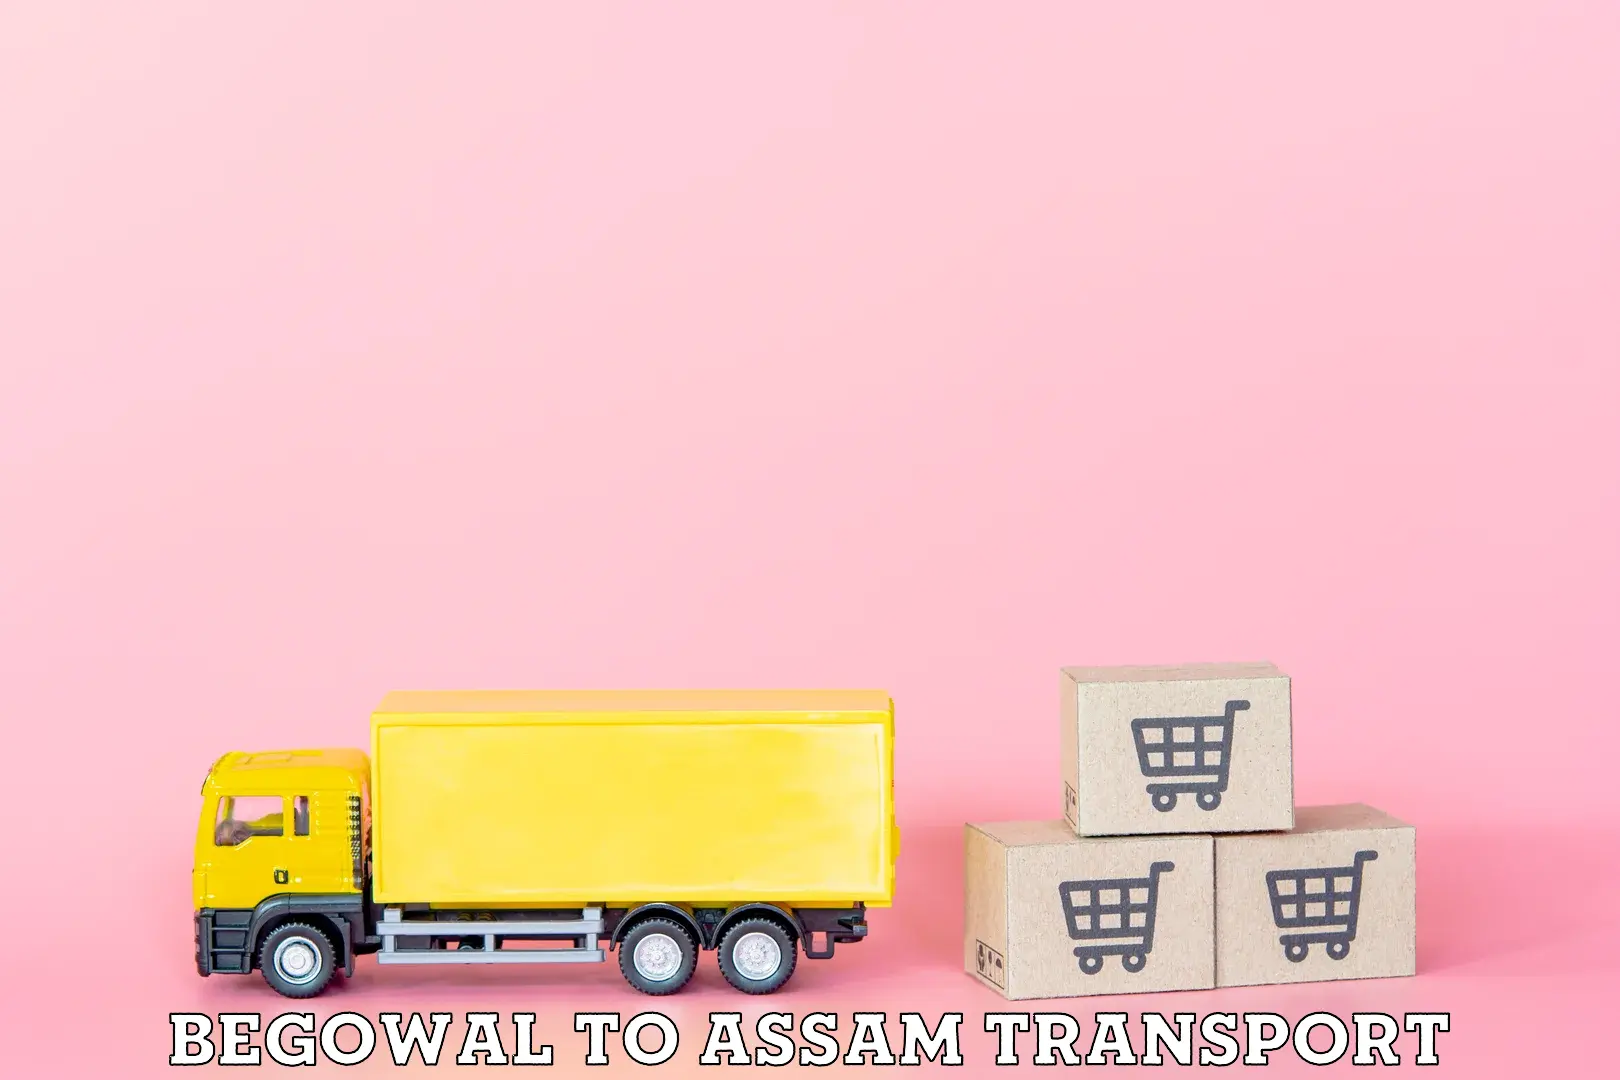 Daily transport service Begowal to Karbi Anglong